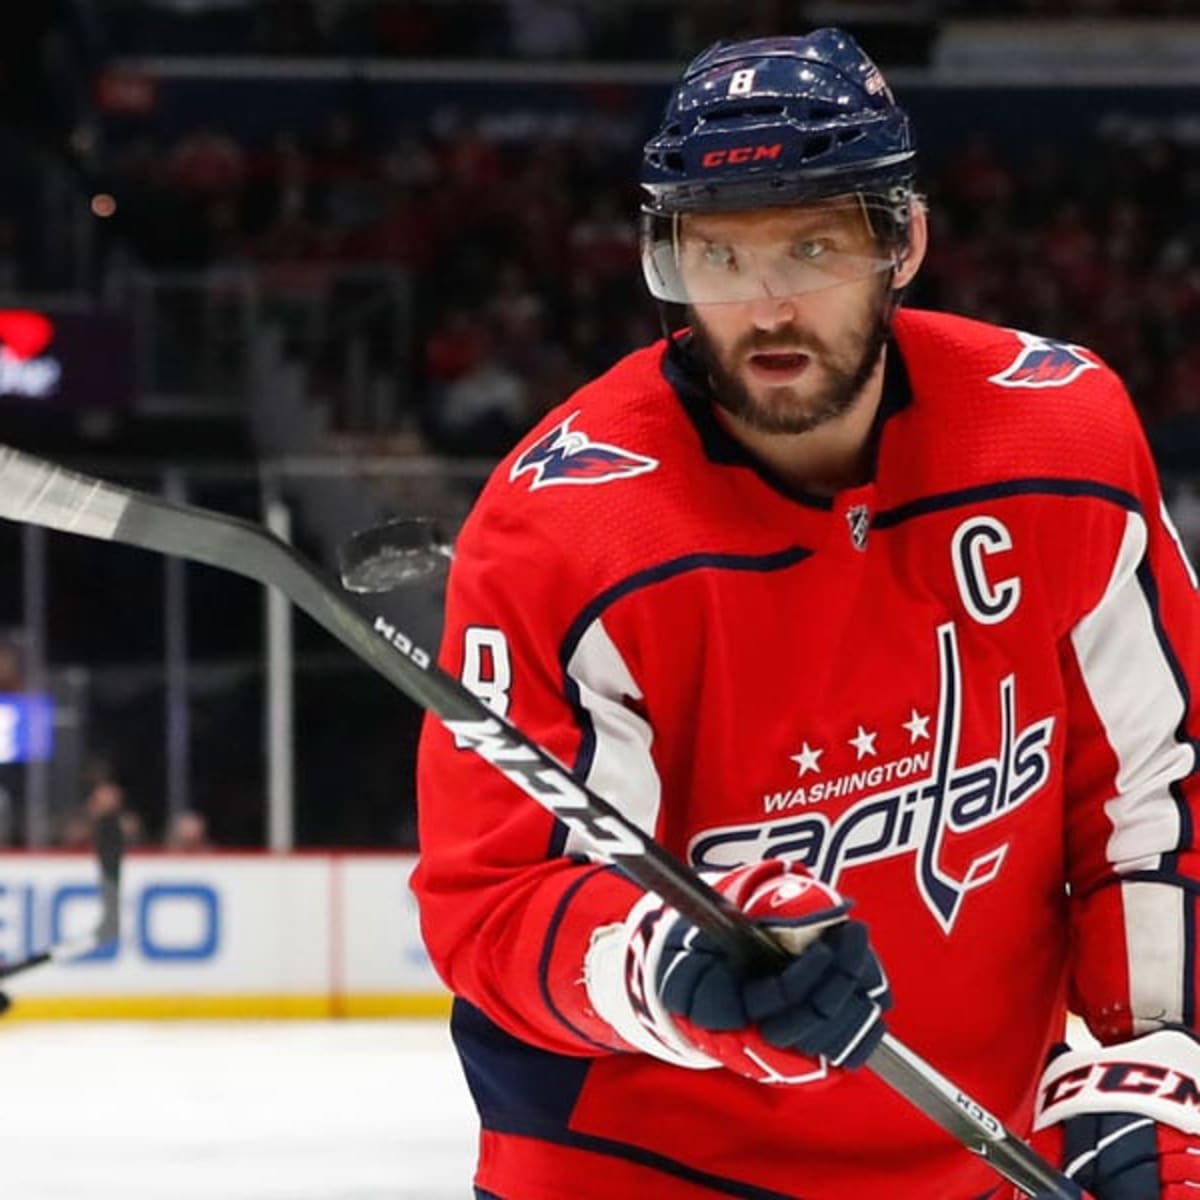 Ovechkin Chasing Gretzky: Assisting Ovi on goals is an art